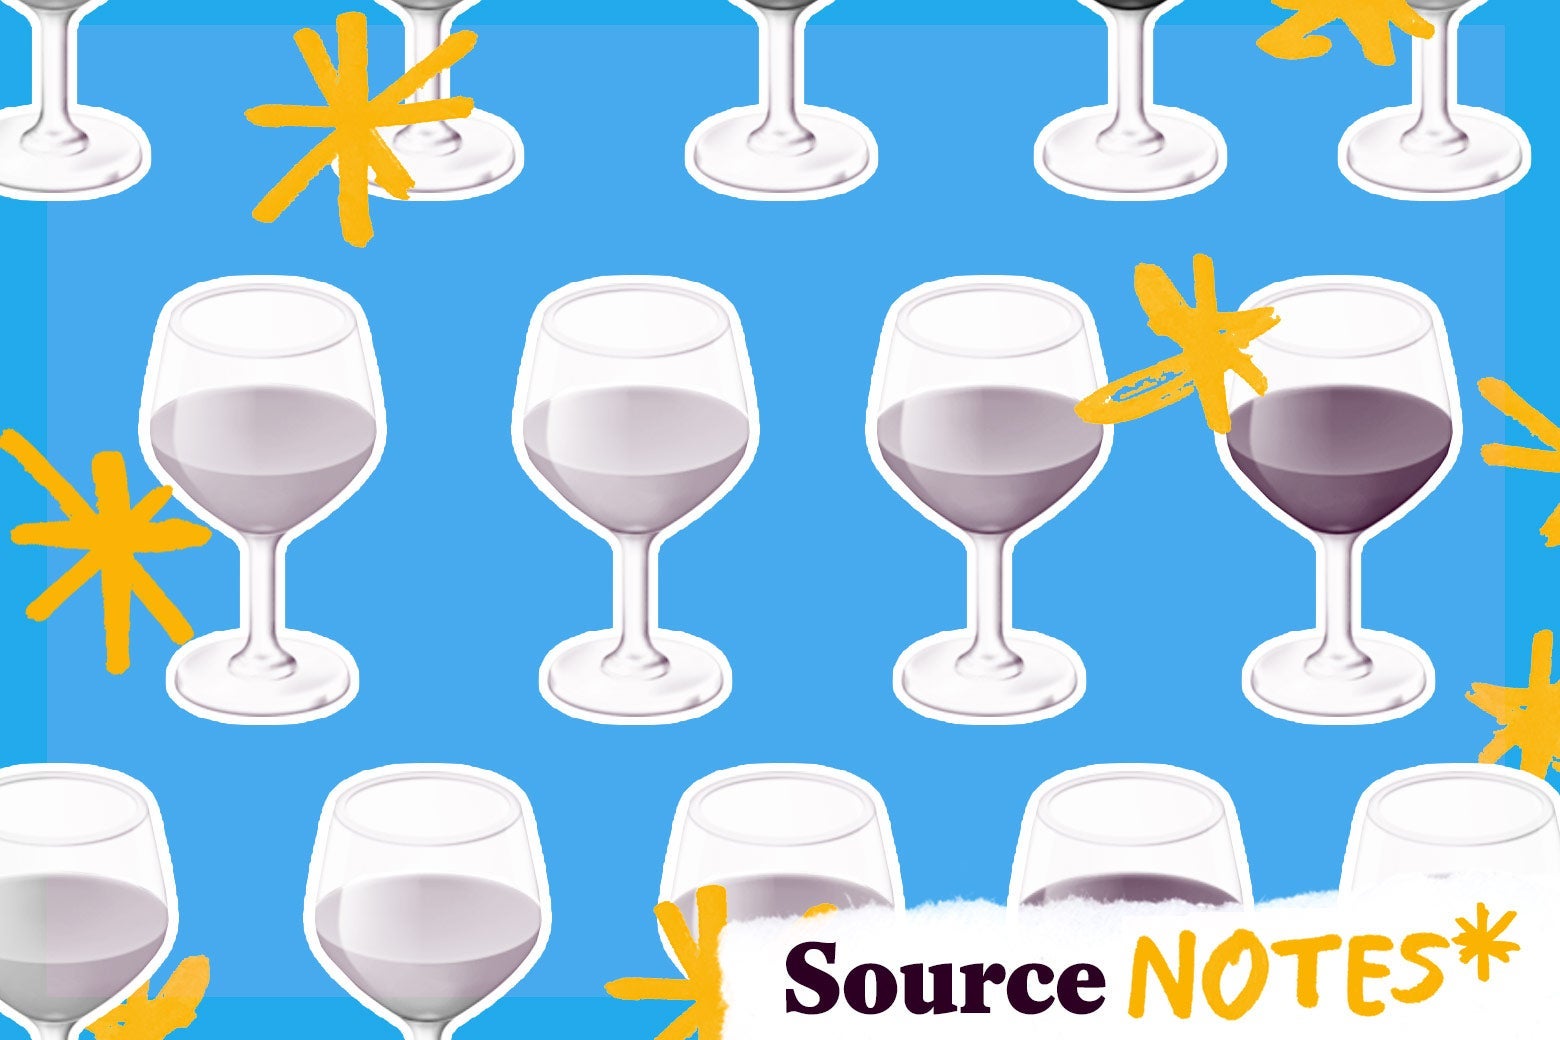 Photo illustration of a wine glass gradient emoji with the Source Notes logo.